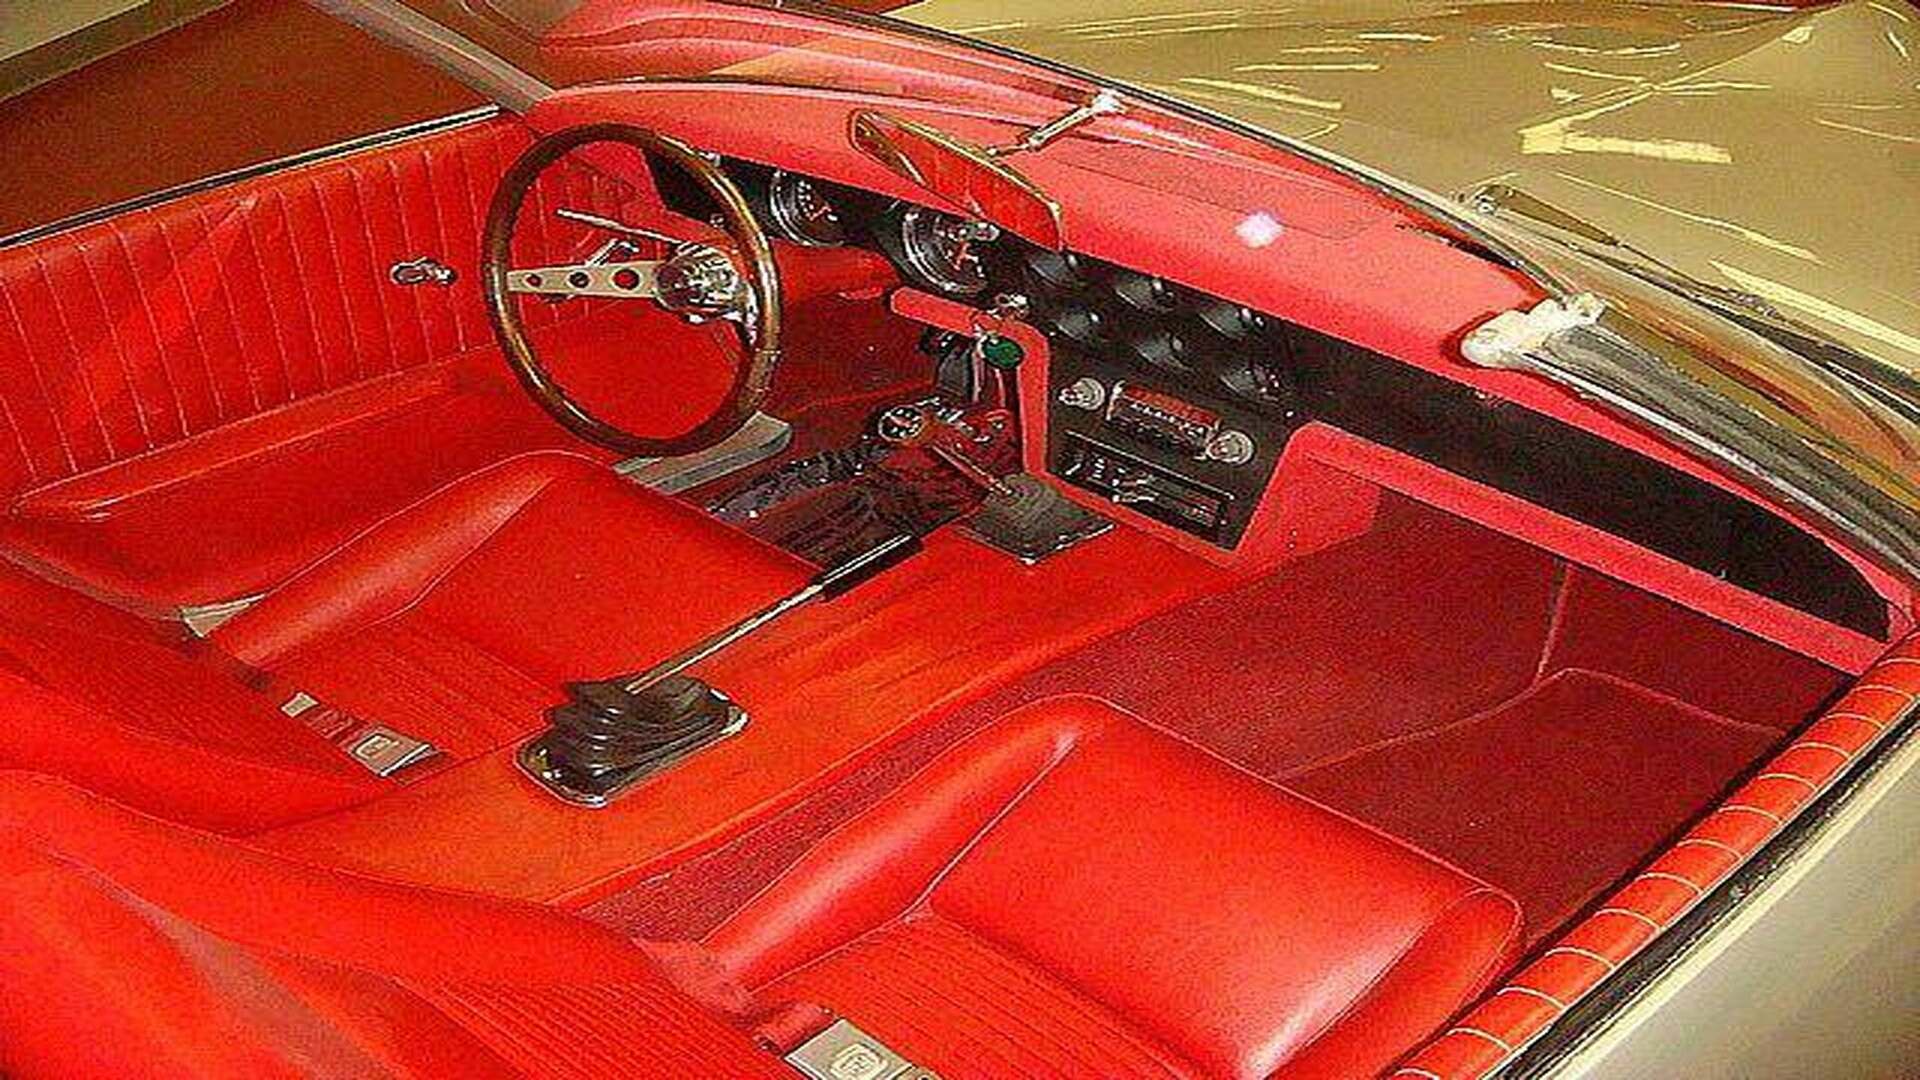 The Interior, Steering, And Dashboard Of The 1964 Pontiac Banshee Prototype XP-833 Coupe Thats On Auction